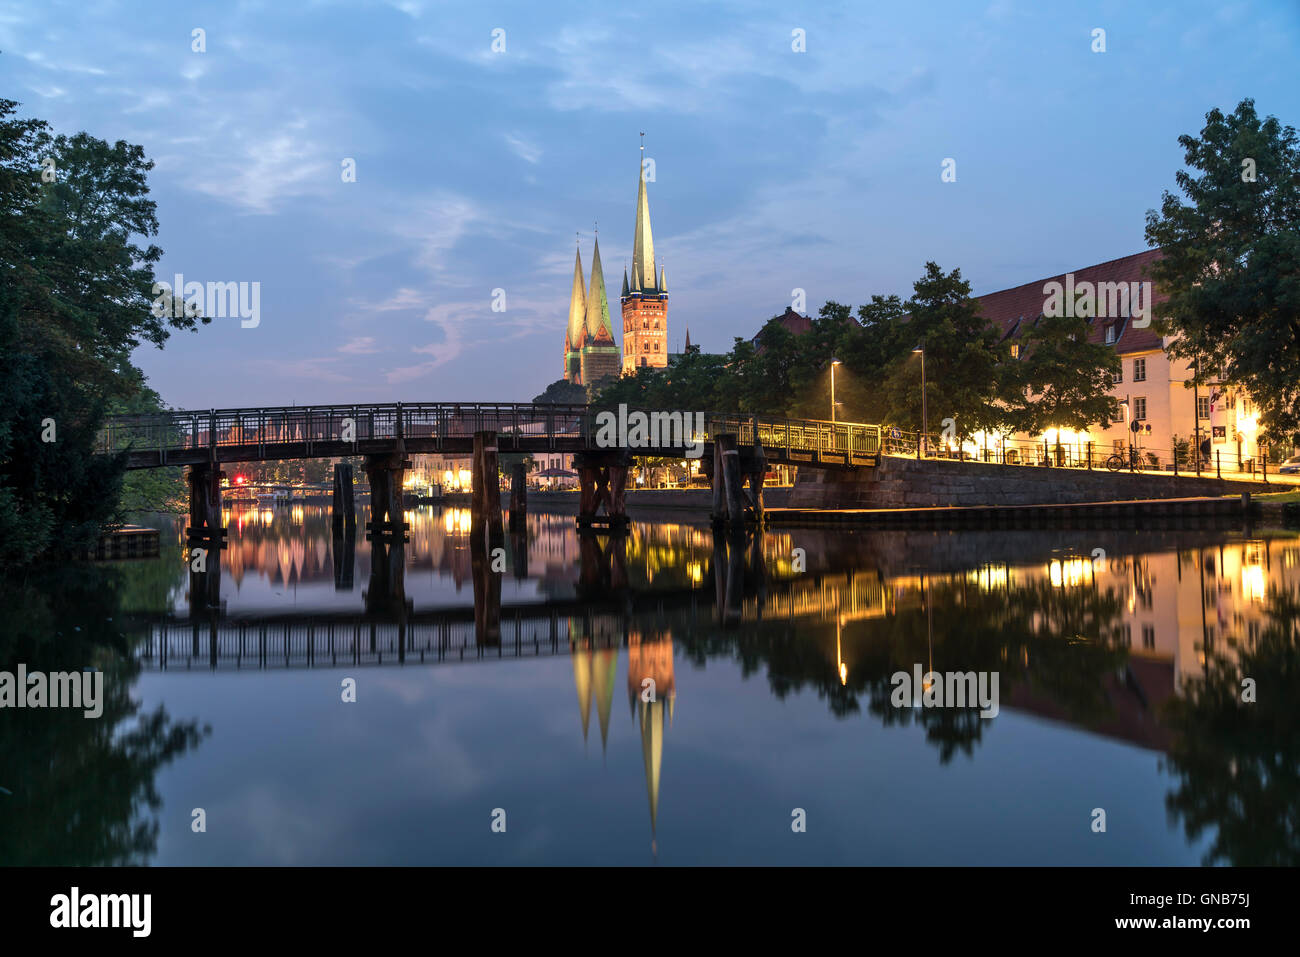 old town and river Trave at dusk, Lübeck, Schleswig-Holstein, Germany Stock Photo